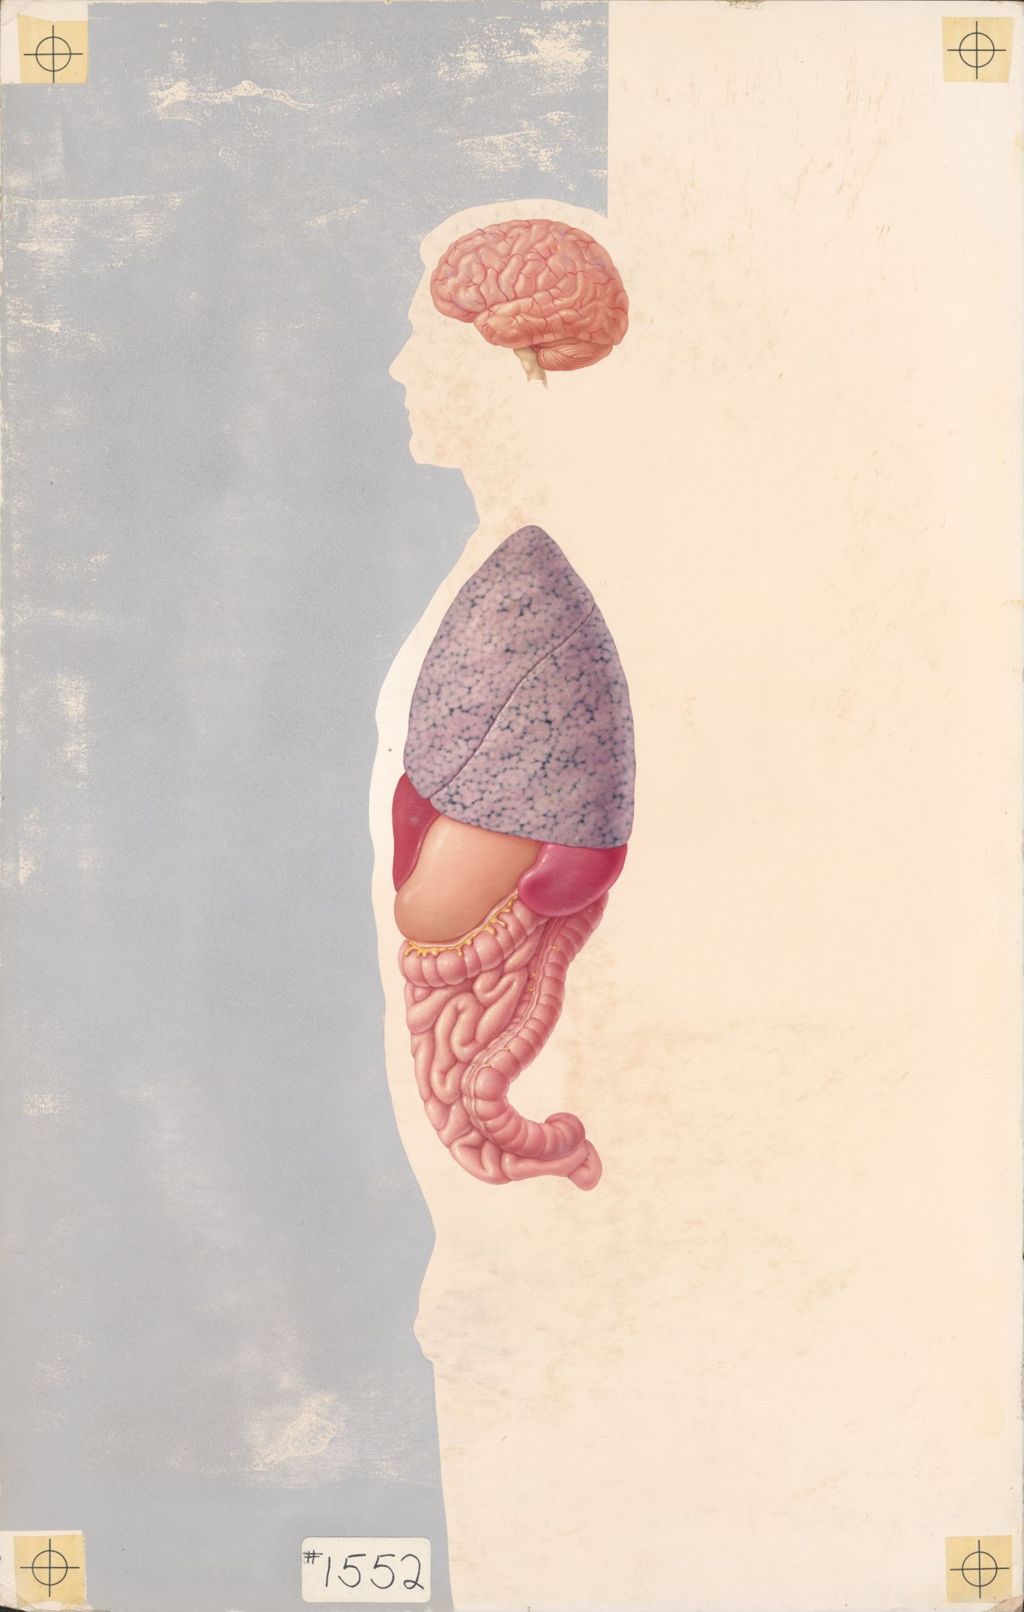 Miniature of Sagittal view of man showing brain and organs